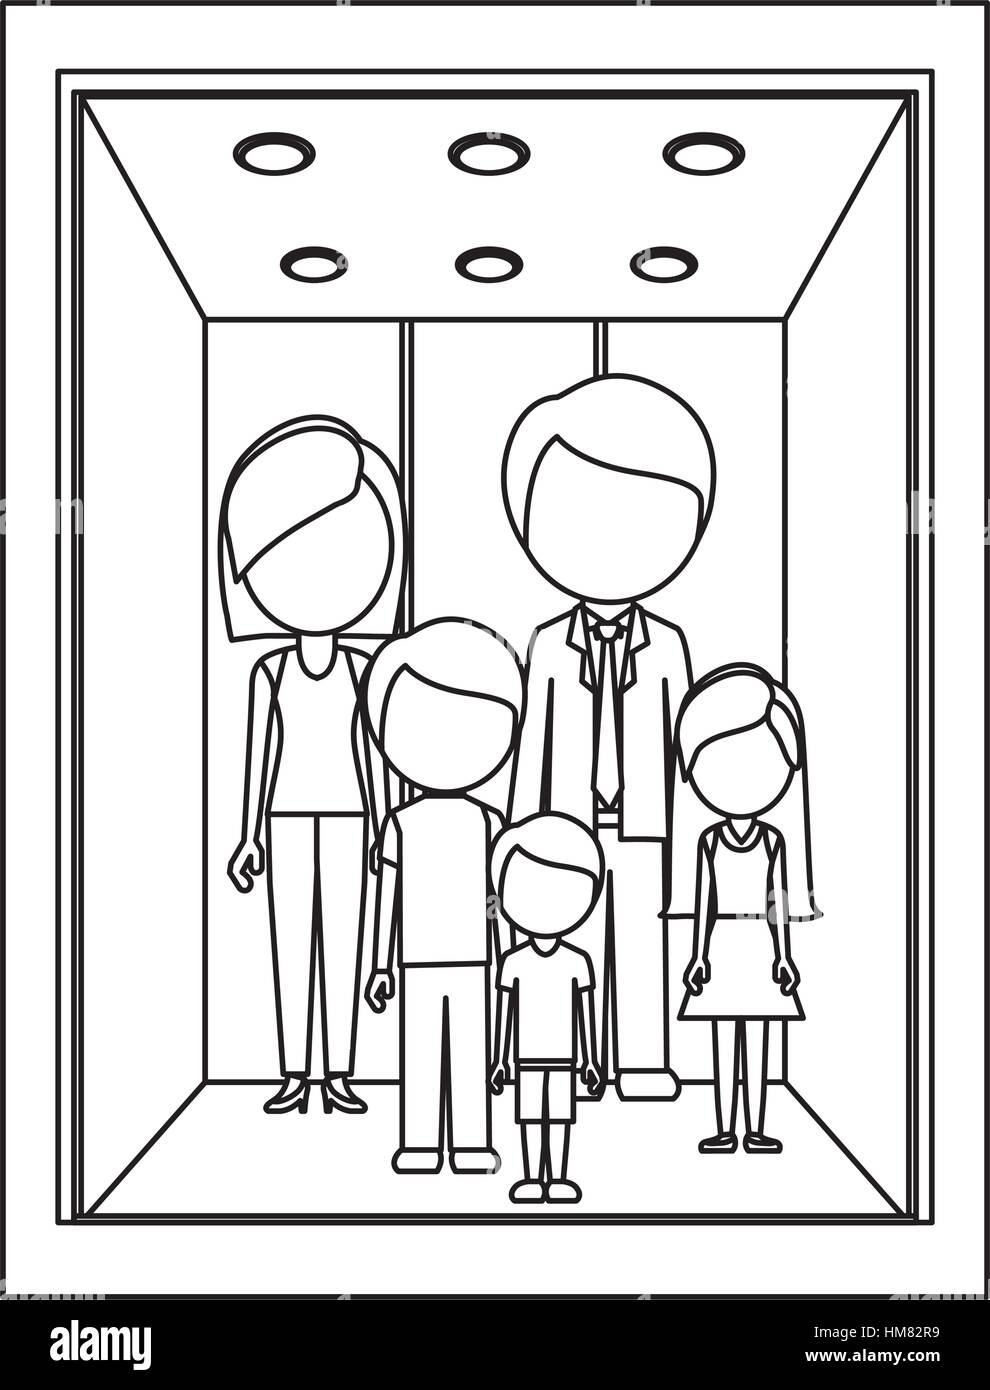 monochrome contour with family in elevator vector illustration Stock Vector